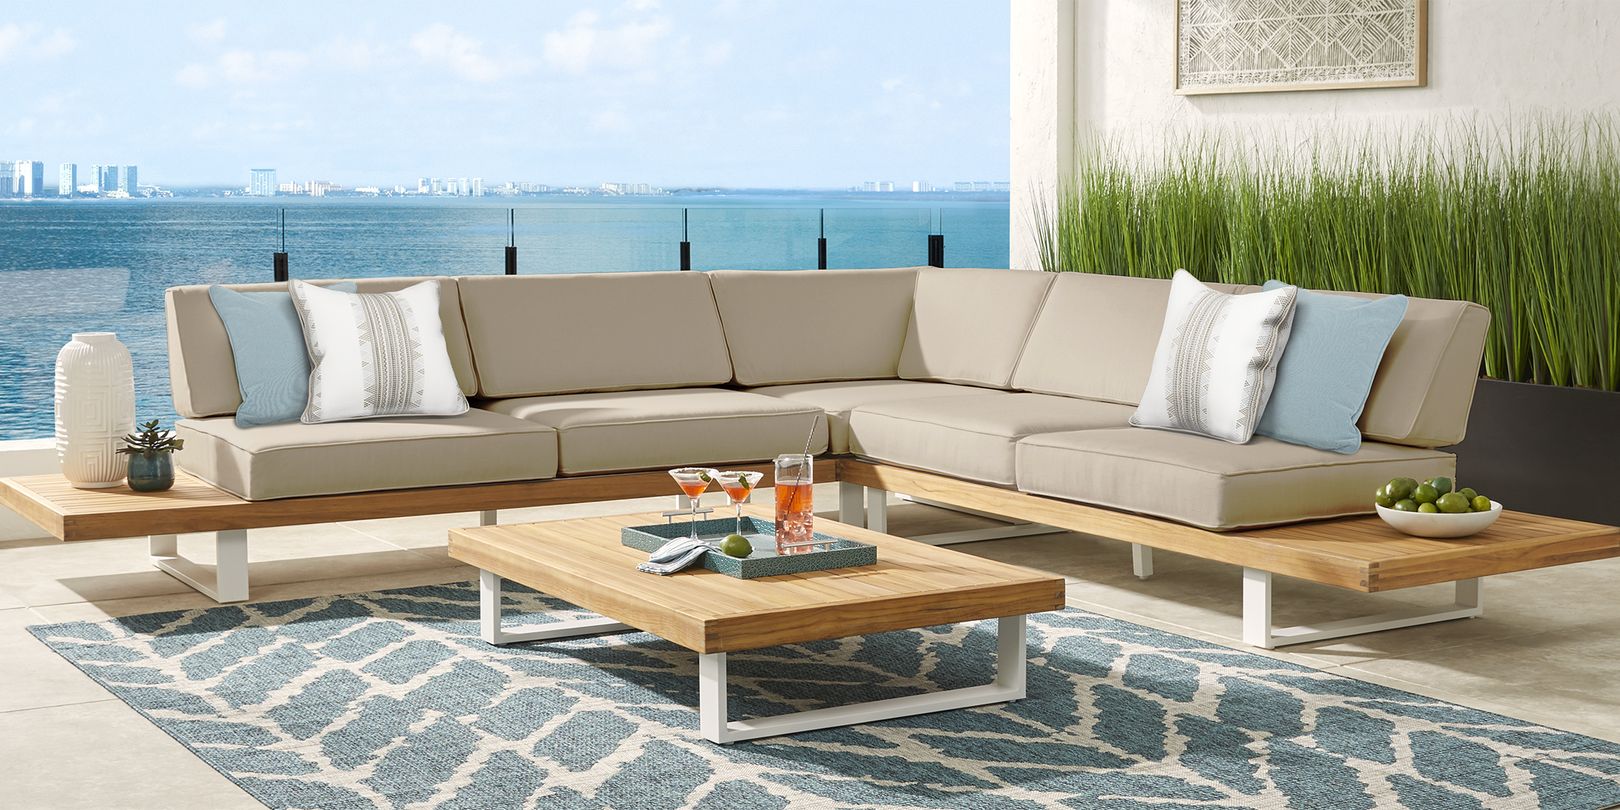 photo of teak three piece patio sectional with gray cushions